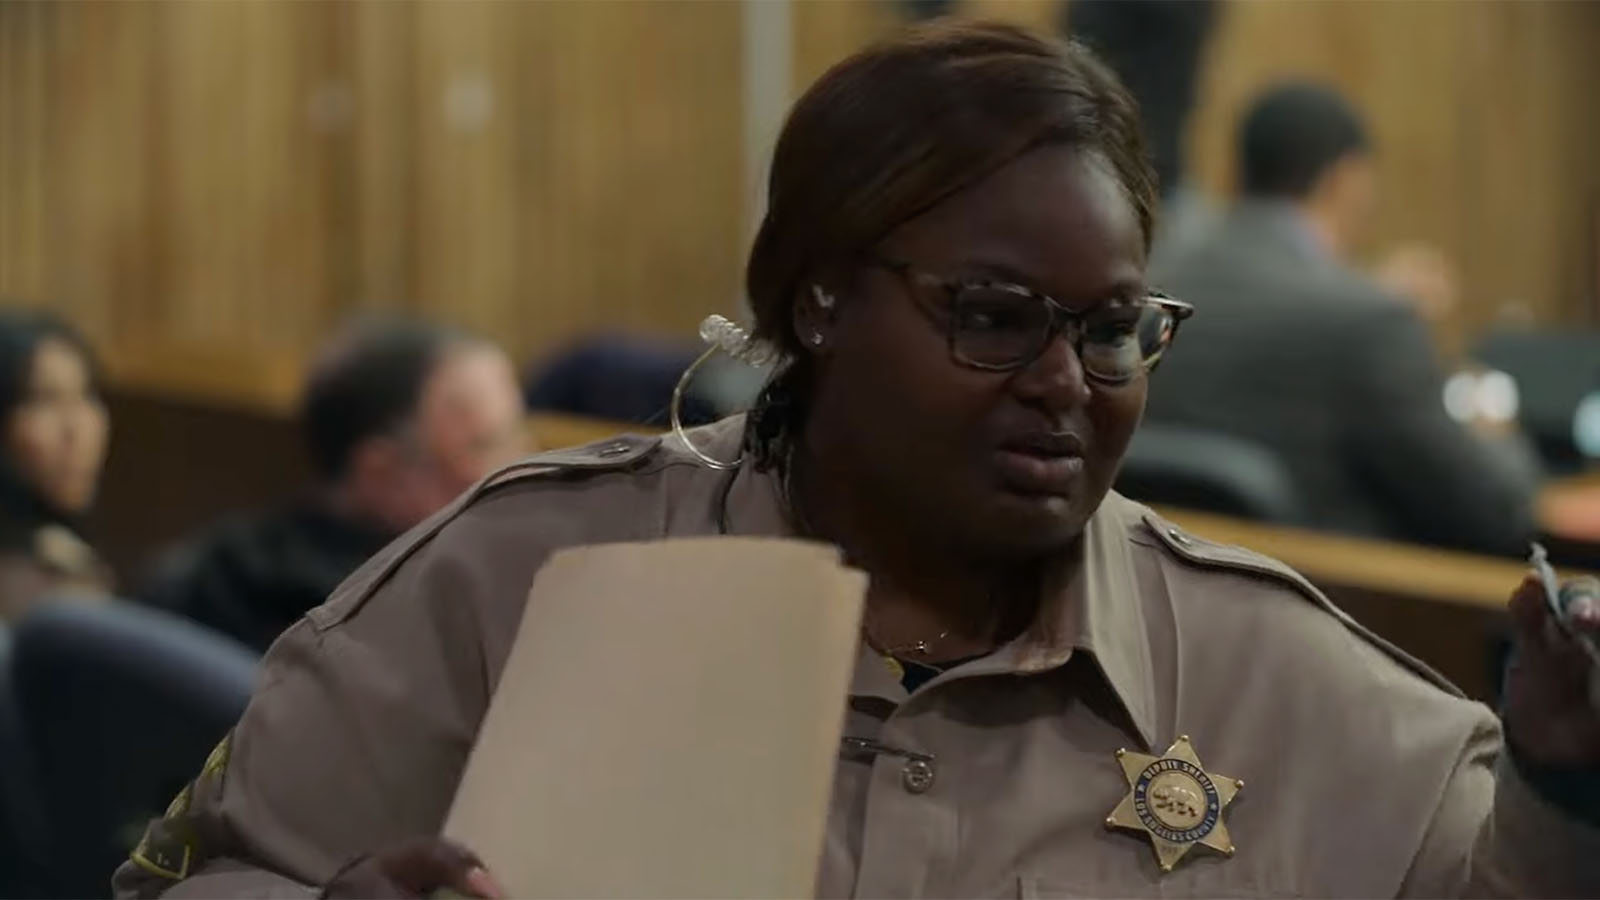 Jury Duty's court officer Nikki Wilder (Rashida Olayiwola) helps to move things in the right direction. Image © Amazon Prime Video